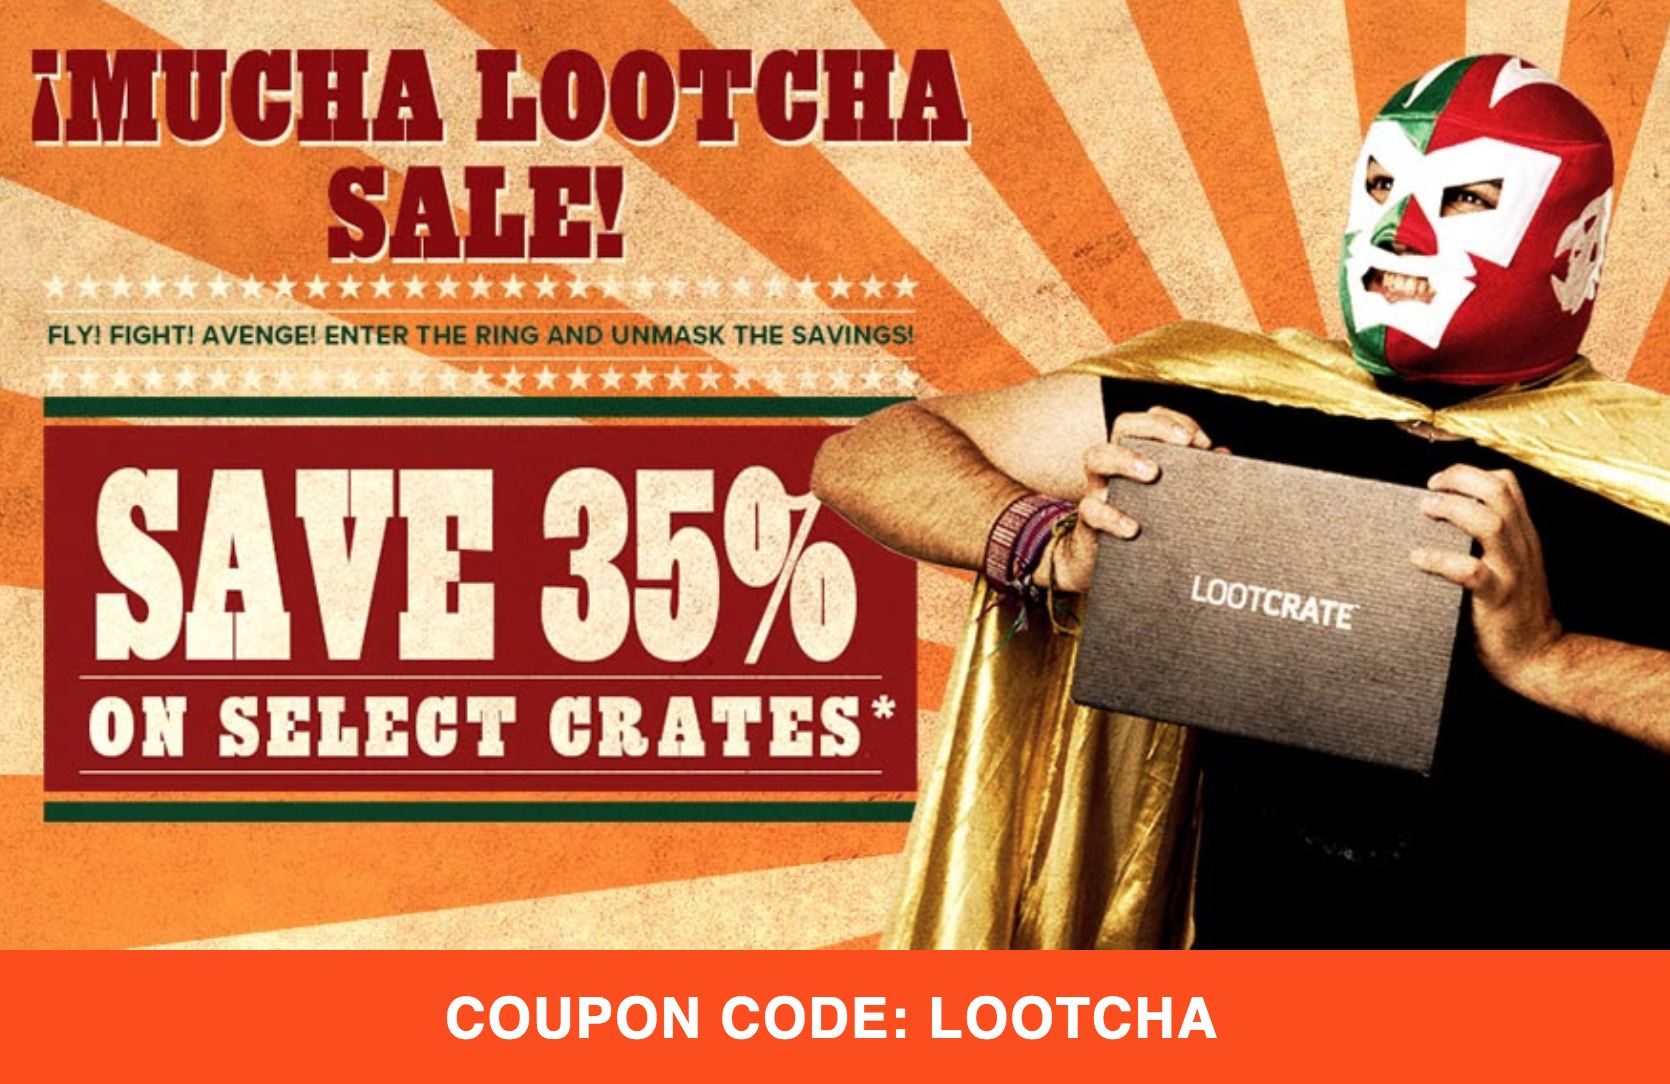 Loot Crate Sale – 35% Off Select Crates!